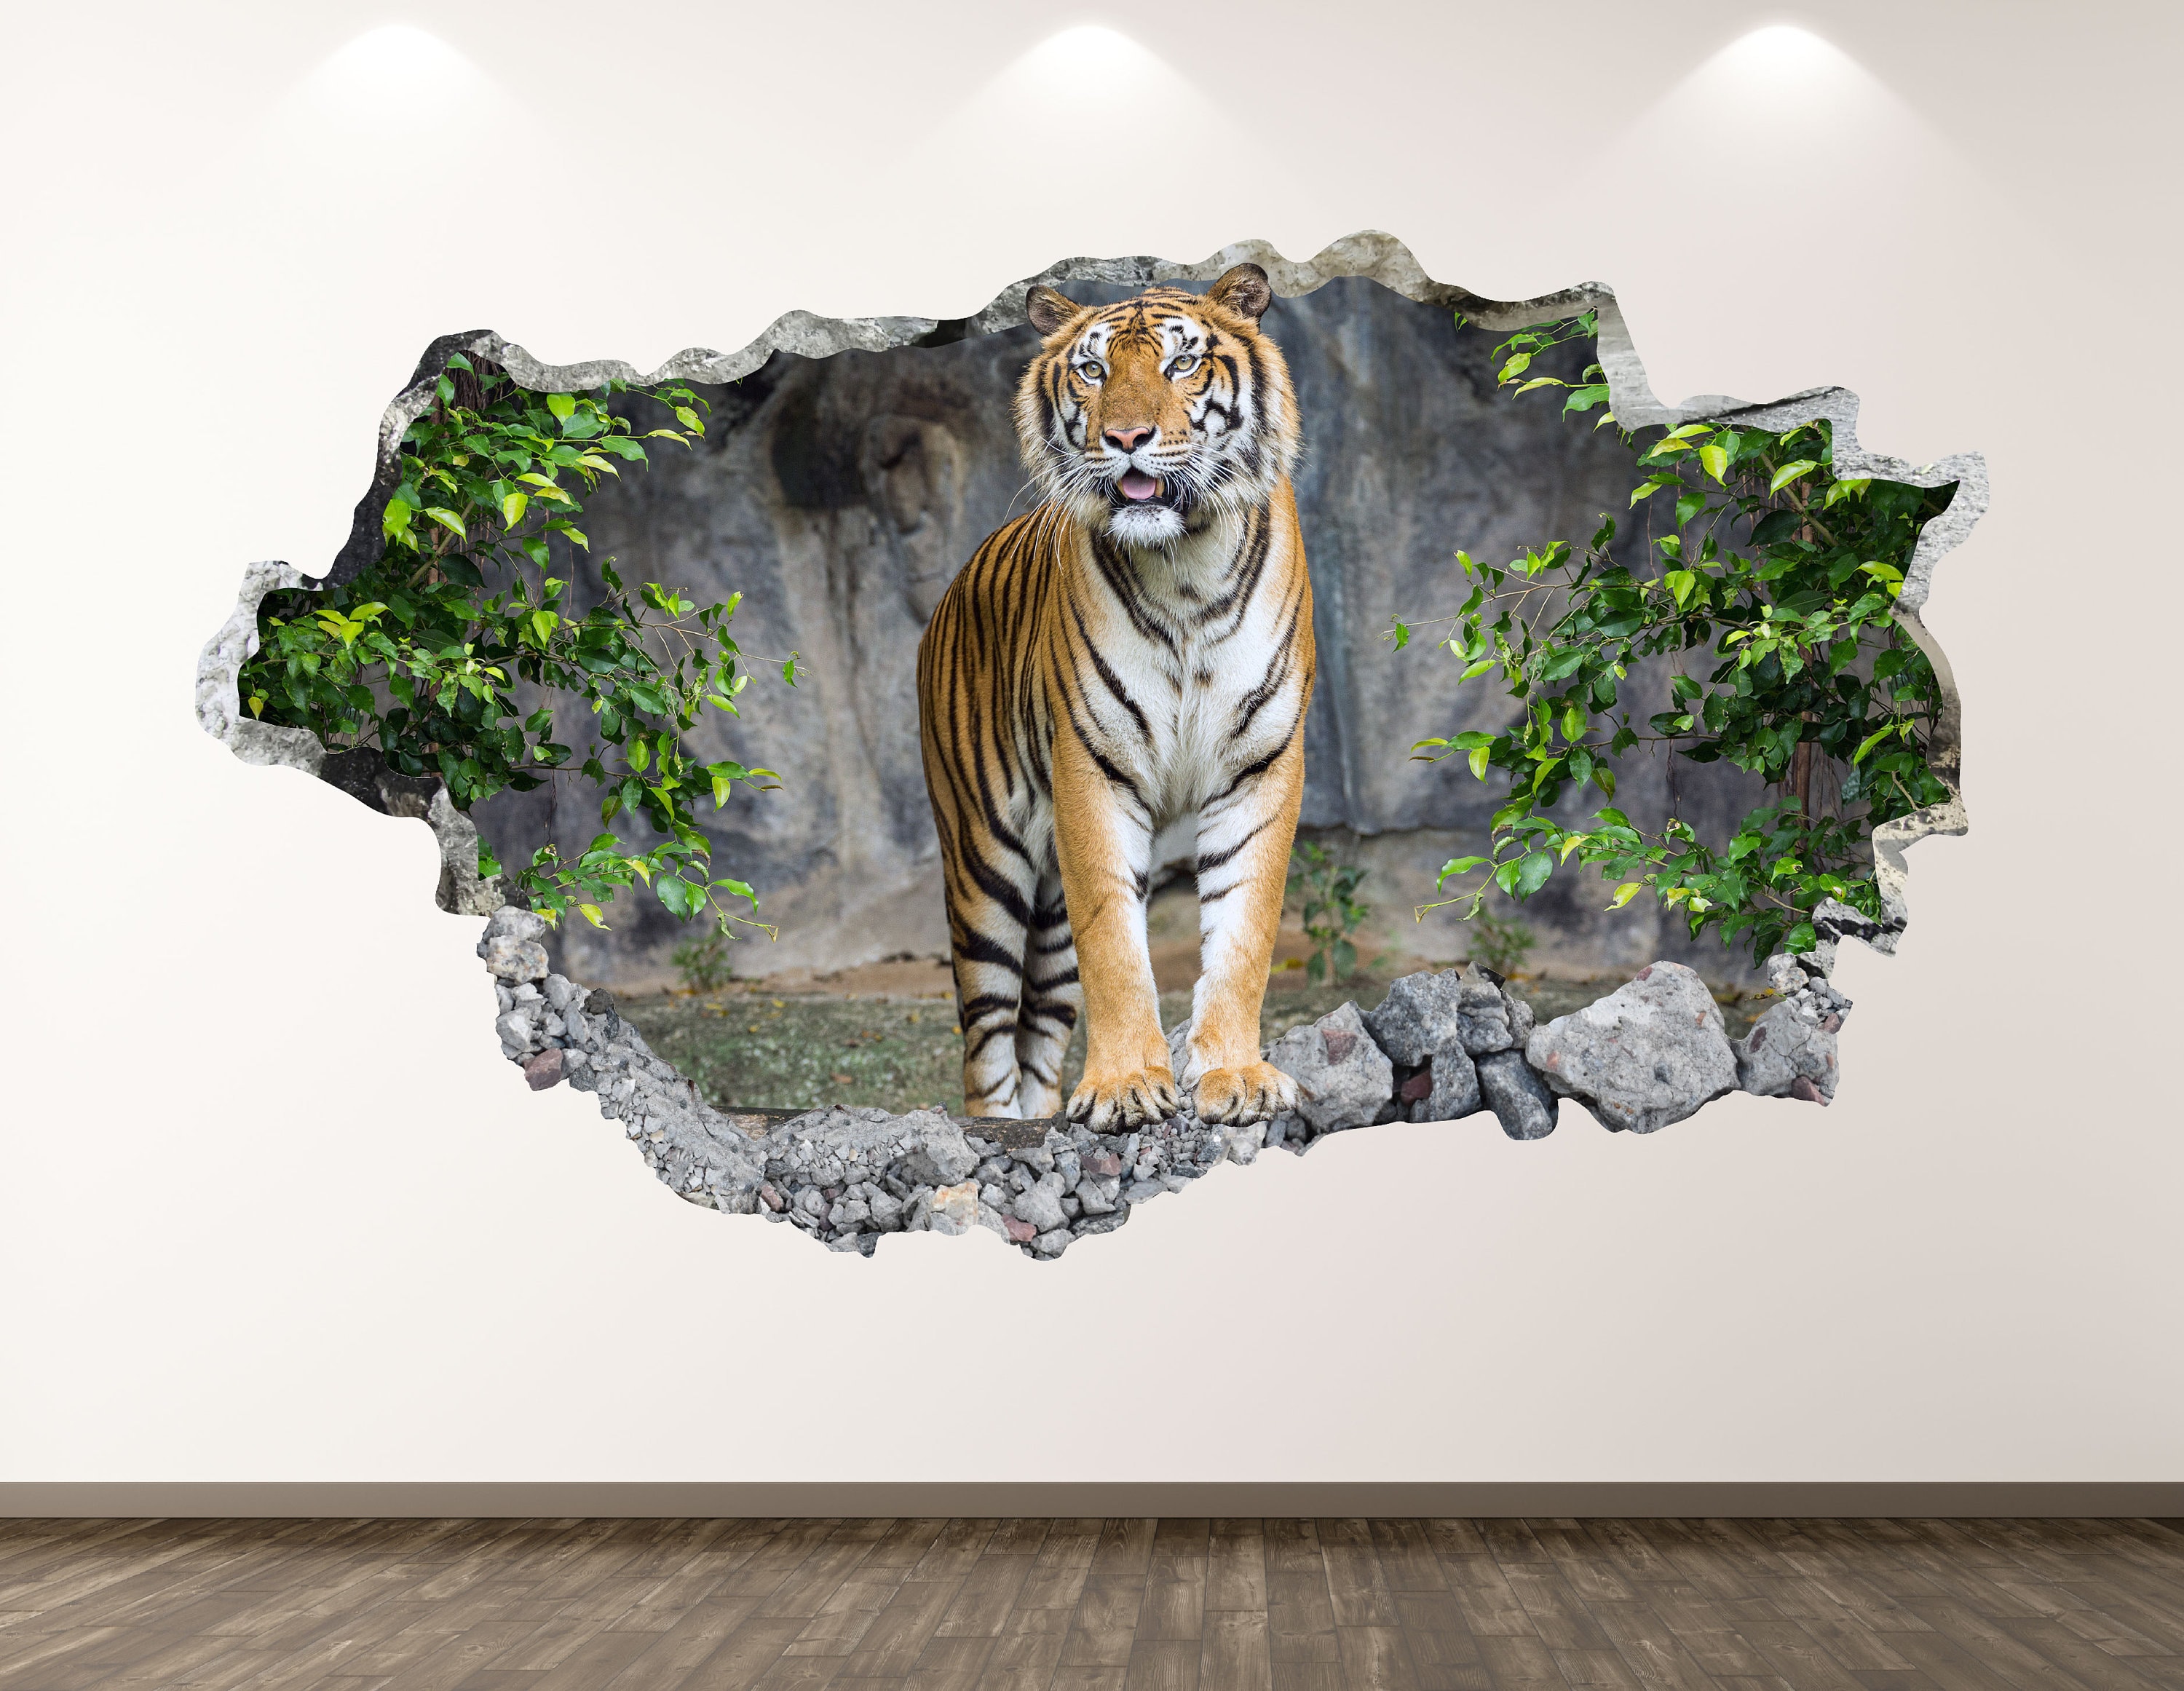 Black Panther 3D Smashed Wall Sticker Decal Art Mural Jungle Animals J1172 